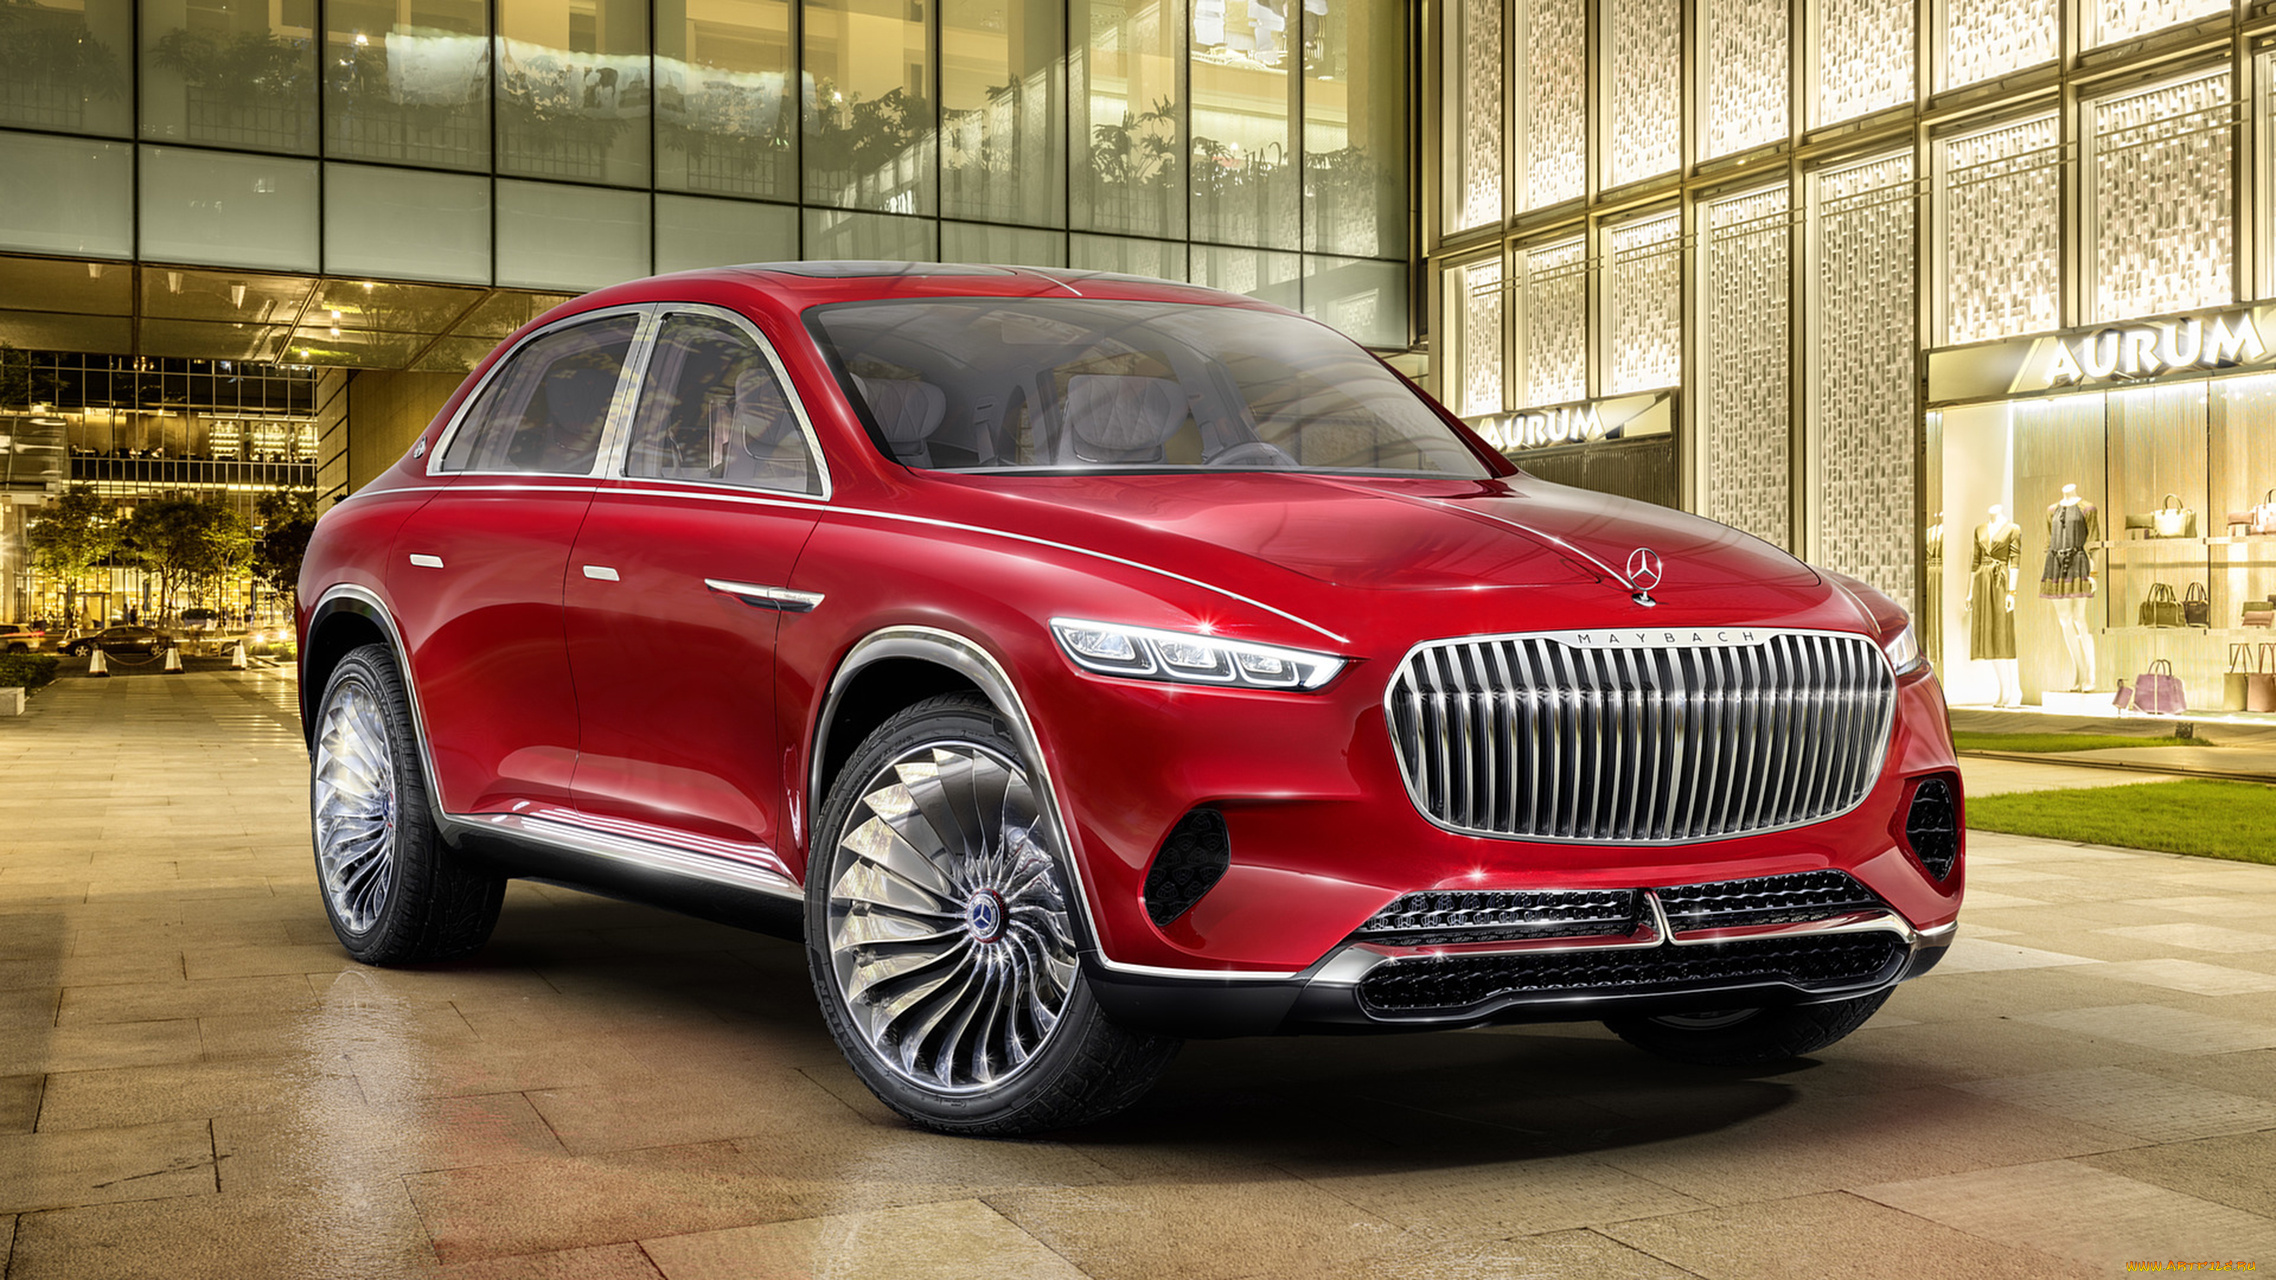 mercedes-maybach, vision, ultimate, luxury, suv, concept, 2018, автомобили, mercedes-benz, concept, suv, luxury, ultimate, vision, mercedes-maybach, 2018